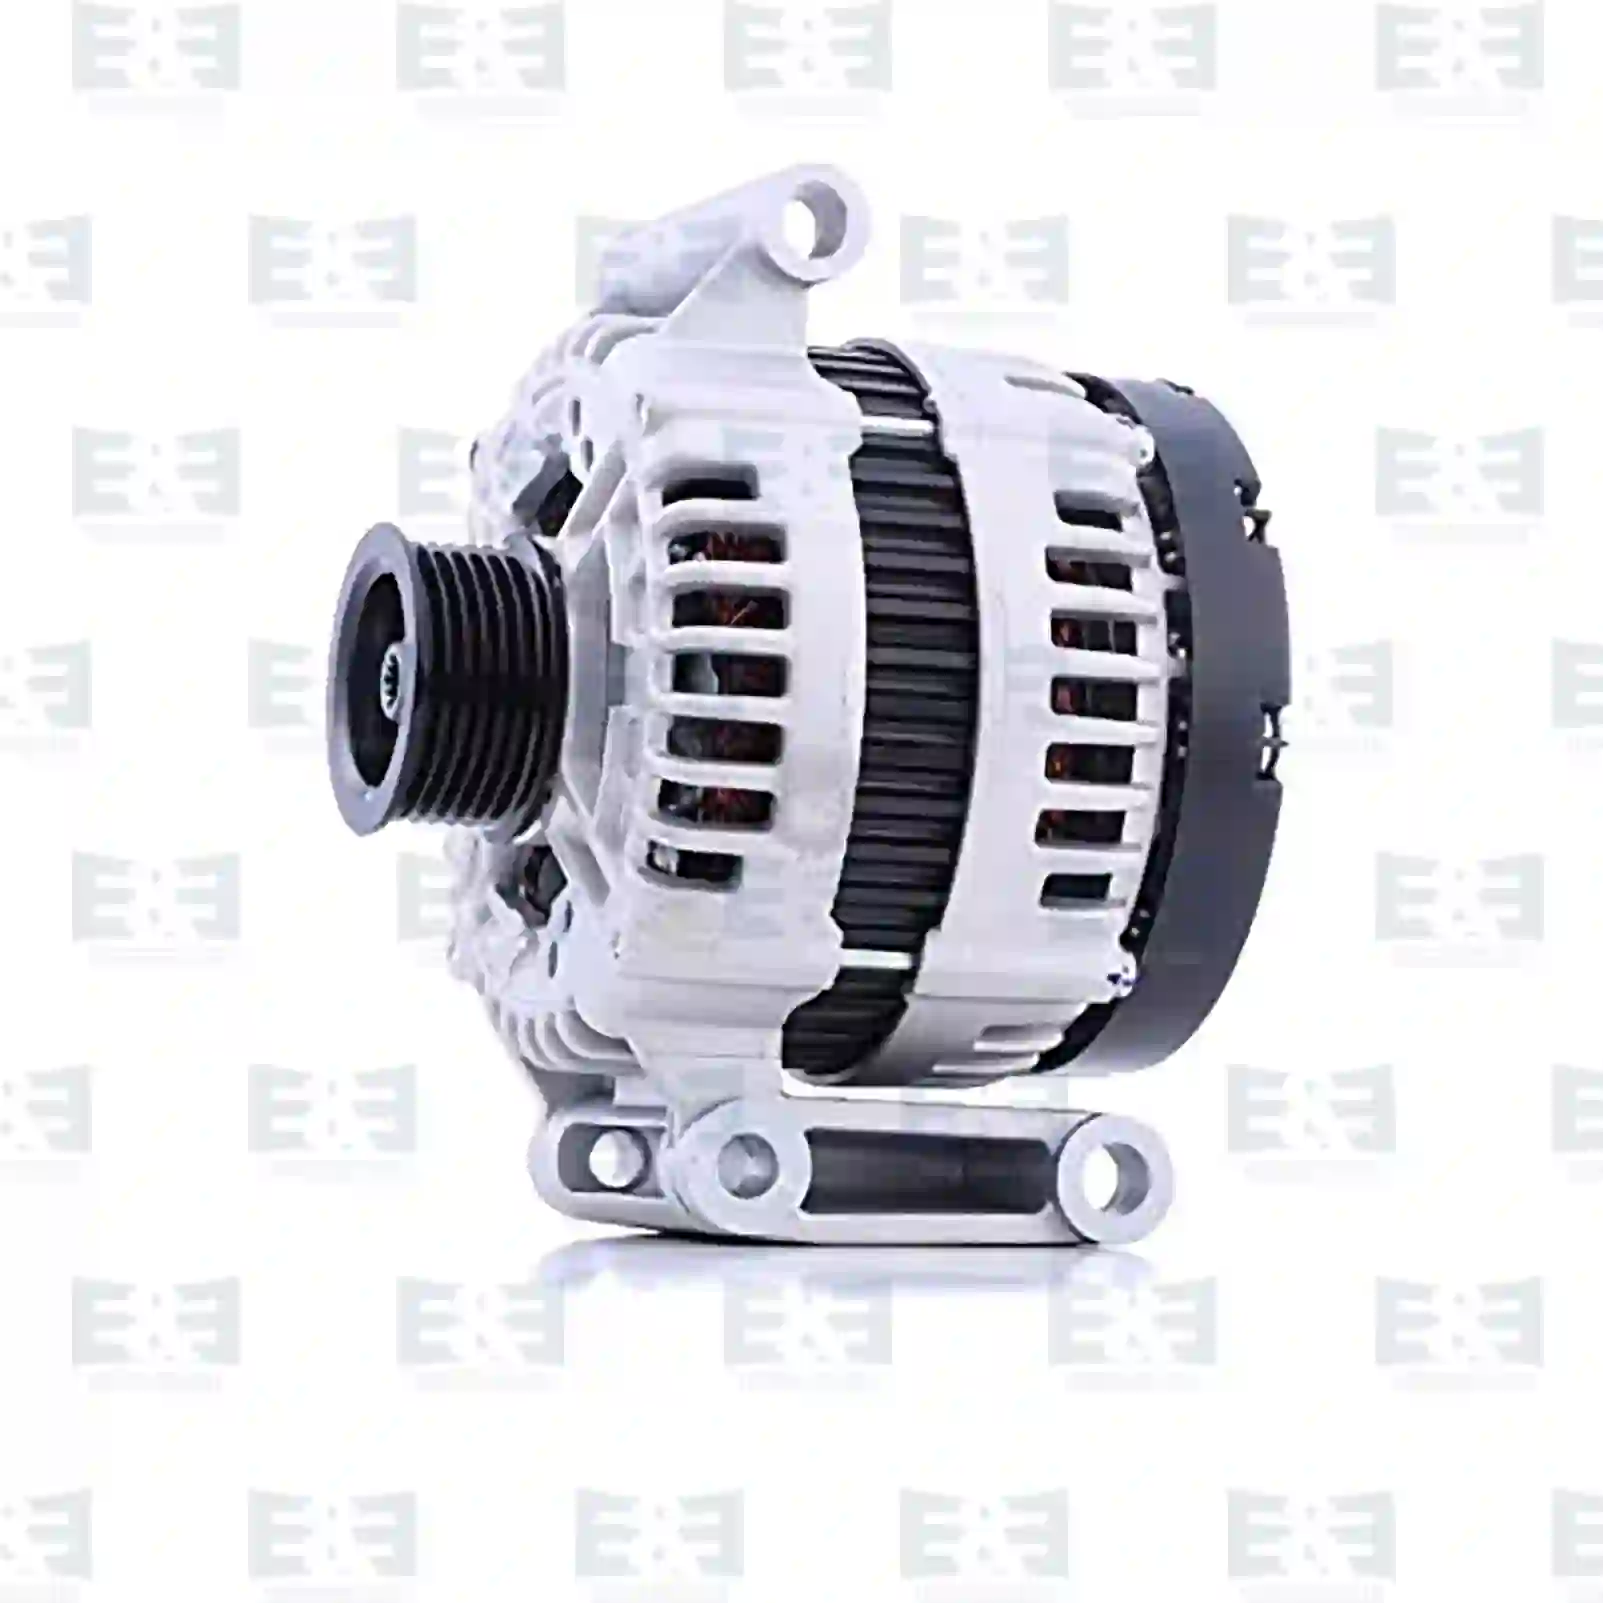 Alternator Alternator, with pulley, EE No 2E2290988 ,  oem no:5705EA, 9658144680, 9659918080, 9676143580, 9658144680, 9659918080, 967614358, 9658144680, 9659918080, 9676143580, 1404791, 1572736, 1581843, 1712779, 1747021, 6C1T-10300-BD, 6C1T1-0300-BA, 6C1T1-0300-BB, 6C1T1-0300-BC, 6C1T10300B, AC1T-10300-BA, AC1T-10300-BB, 5705EA, 9658144680, 9659918080, 9676143580 E&E Truck Spare Parts | Truck Spare Parts, Auotomotive Spare Parts